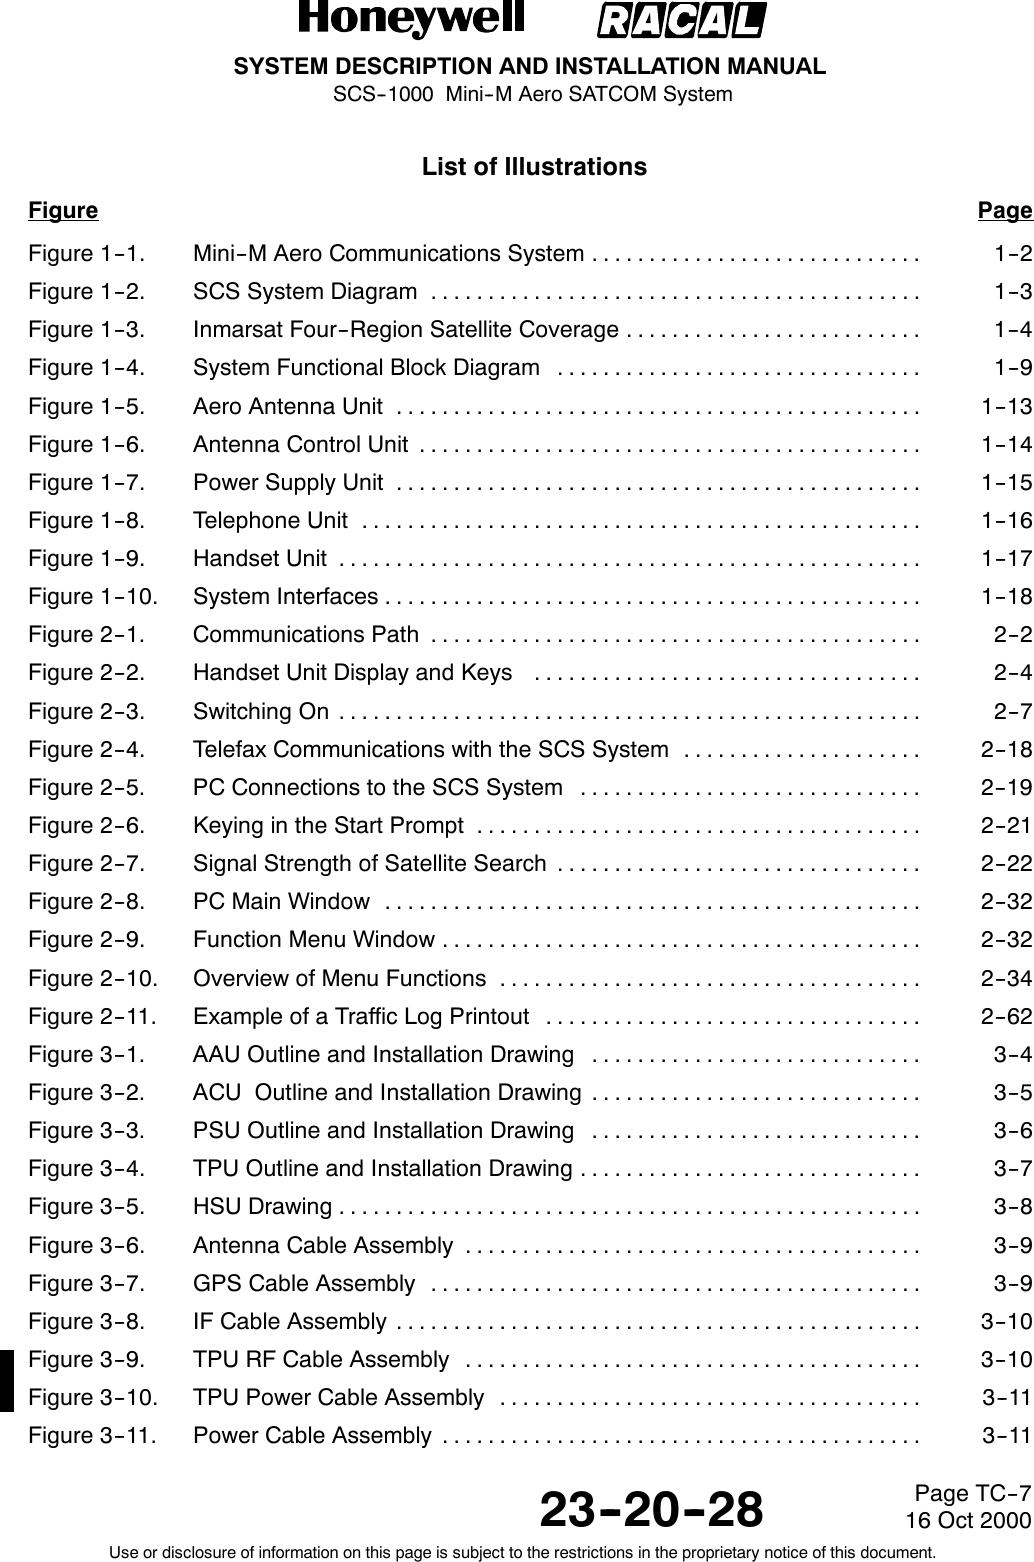 SYSTEM DESCRIPTION AND INSTALLATION MANUALSCS--1000 Mini--M Aero SATCOM System23--20--28Use or disclosure of information on this page is subject to the restrictions in the proprietary notice of this document.Page TC--716 Oct 2000List of IllustrationsFigure PageFigure 1--1. Mini--M Aero Communications System 1--2.............................Figure 1--2. SCS System Diagram 1--3...........................................Figure 1--3. Inmarsat Four--Region Satellite Coverage 1--4..........................Figure 1--4. System Functional Block Diagram 1--9................................Figure 1--5. Aero Antenna Unit 1--13..............................................Figure 1--6. Antenna Control Unit 1--14............................................Figure 1--7. Power Supply Unit 1--15..............................................Figure 1--8. Telephone Unit 1--16.................................................Figure 1--9. Handset Unit 1--17...................................................Figure 1--10. System Interfaces 1--18...............................................Figure 2--1. Communications Path 2--2...........................................Figure 2--2. Handset Unit Display and Keys 2--4..................................Figure 2--3. Switching On 2--7...................................................Figure 2--4. Telefax Communications with the SCS System 2--18.....................Figure 2--5. PC Connections to the SCS System 2--19..............................Figure 2--6. Keying in the Start Prompt 2--21.......................................Figure 2--7. Signal Strength of Satellite Search 2--22................................Figure 2--8. PC Main Window 2--32...............................................Figure 2--9. Function Menu Window 2--32..........................................Figure 2--10. Overview of Menu Functions 2--34.....................................Figure 2--11. Example of a Traffic Log Printout 2--62.................................Figure 3--1. AAU Outline and Installation Drawing 3--4.............................Figure 3--2. ACU Outline and Installation Drawing 3--5.............................Figure 3--3. PSU Outline and Installation Drawing 3--6.............................Figure 3--4. TPU Outline and Installation Drawing 3--7..............................Figure 3--5. HSU Drawing 3--8...................................................Figure 3--6. Antenna Cable Assembly 3--9........................................Figure 3--7. GPS Cable Assembly 3--9...........................................Figure 3--8. IF Cable Assembly 3--10..............................................Figure 3--9. TPU RF Cable Assembly 3--10........................................Figure 3--10. TPU Power Cable Assembly 3--11.....................................Figure 3--11. Power Cable Assembly 3--11..........................................